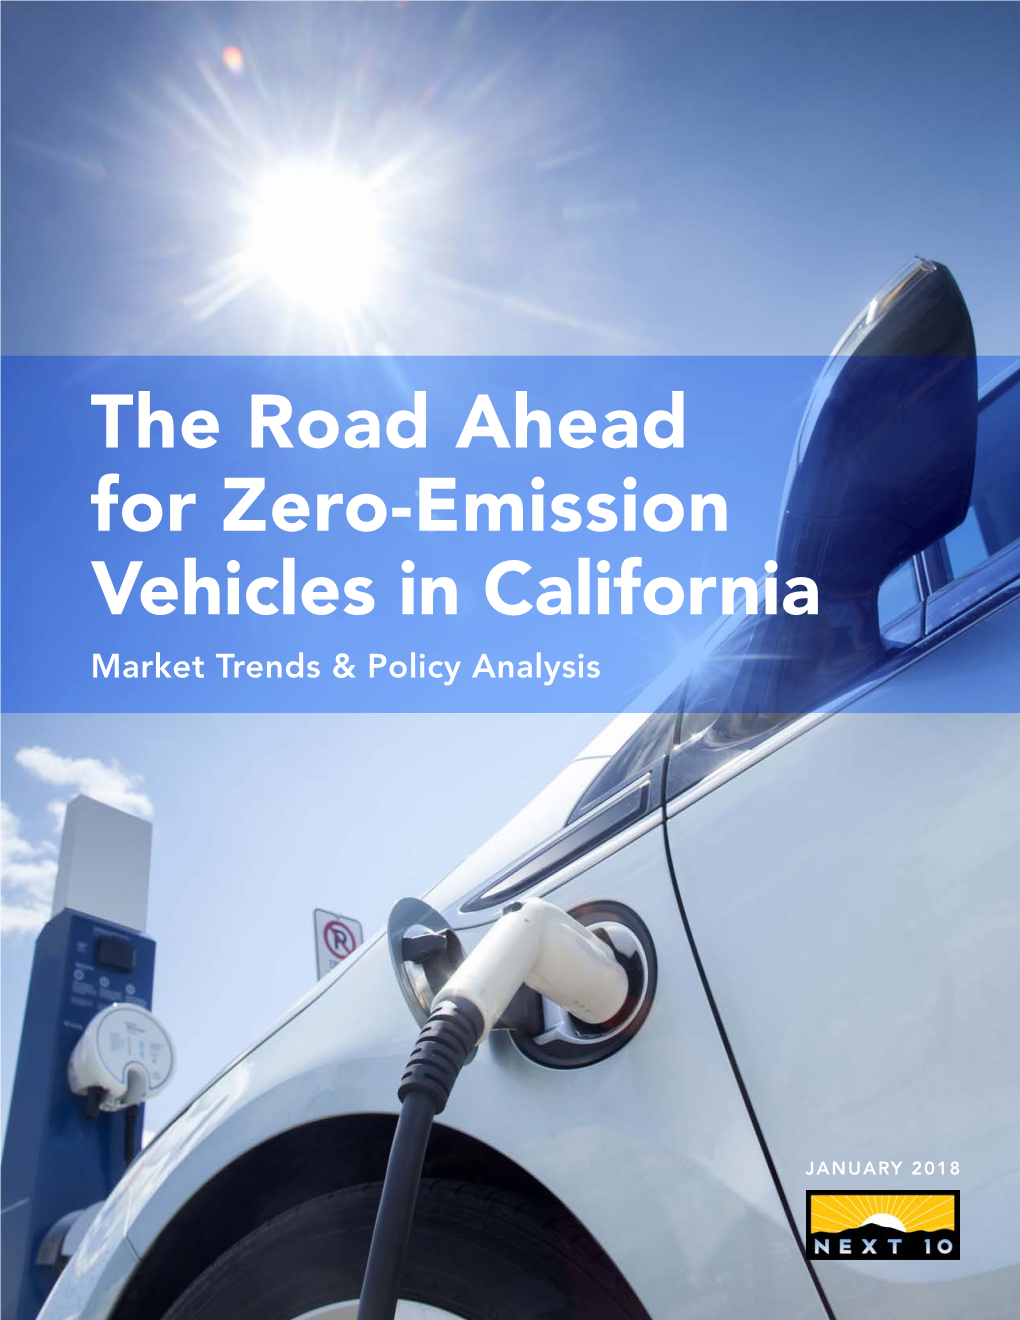 The Road Ahead for Zero-Emission Vehicles in California: Market Trends & Policy Analysis